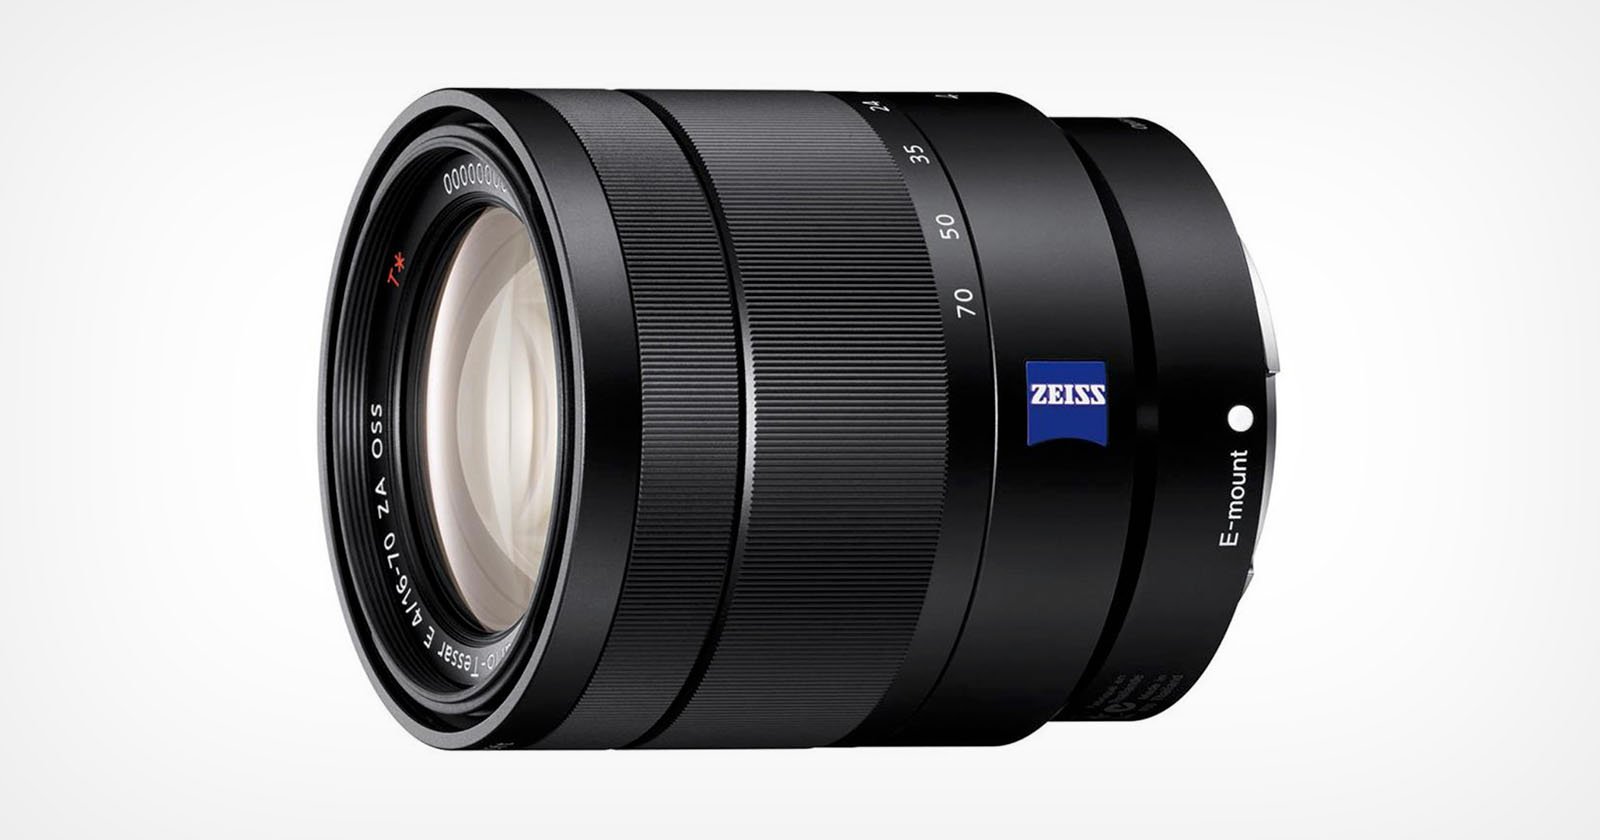 Sony Discontinues the Zeiss 16-70mm f/4 APS-C Lens in Japan: Report